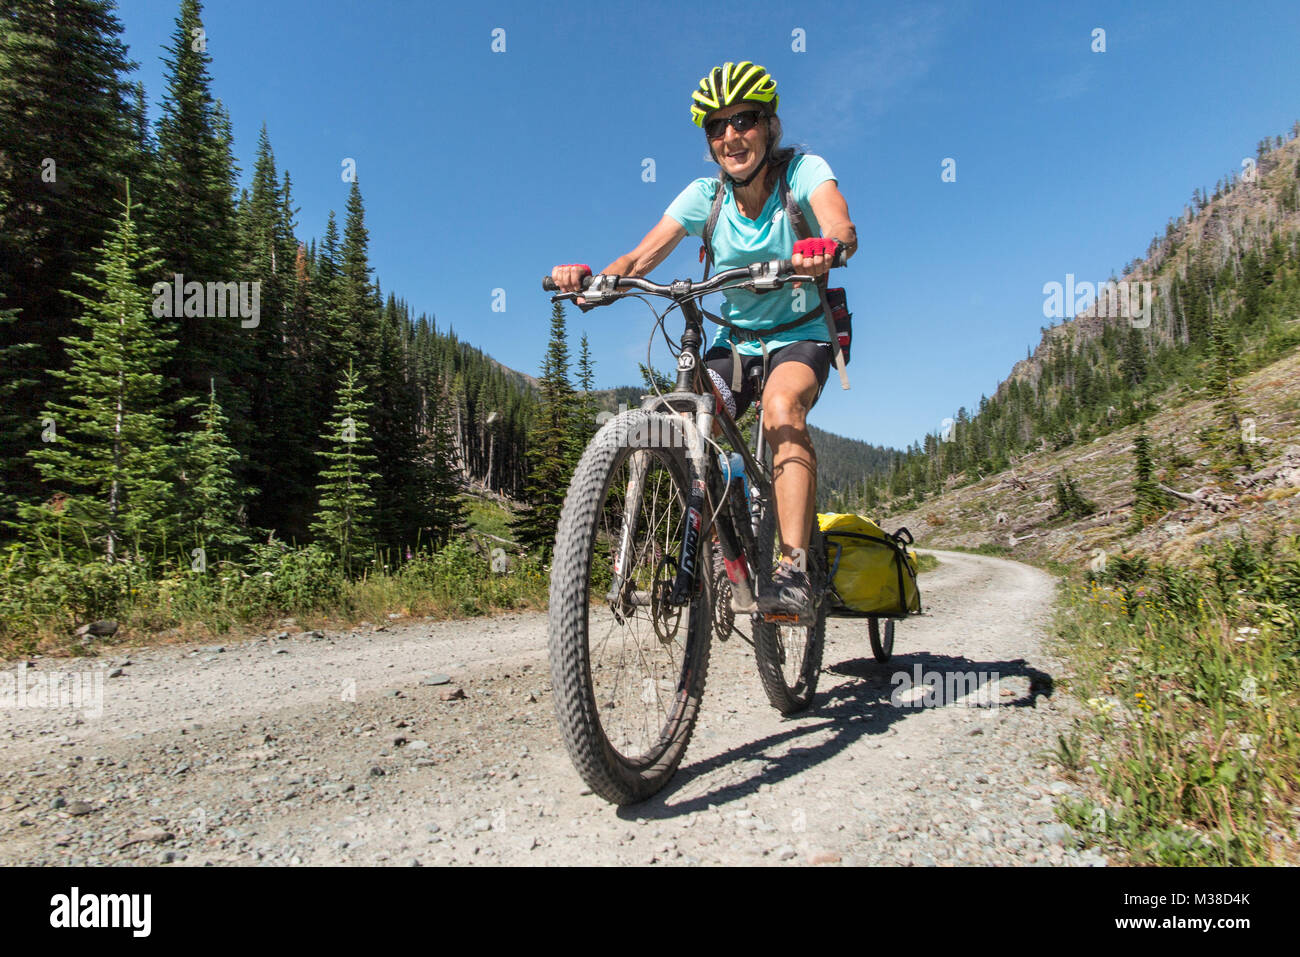 BC00639-00...MONTANA - Vicky Spring at the Whitefish Divide along Forest Service Road 114 section of the Great Divide Mountain Bike Route. Stock Photo